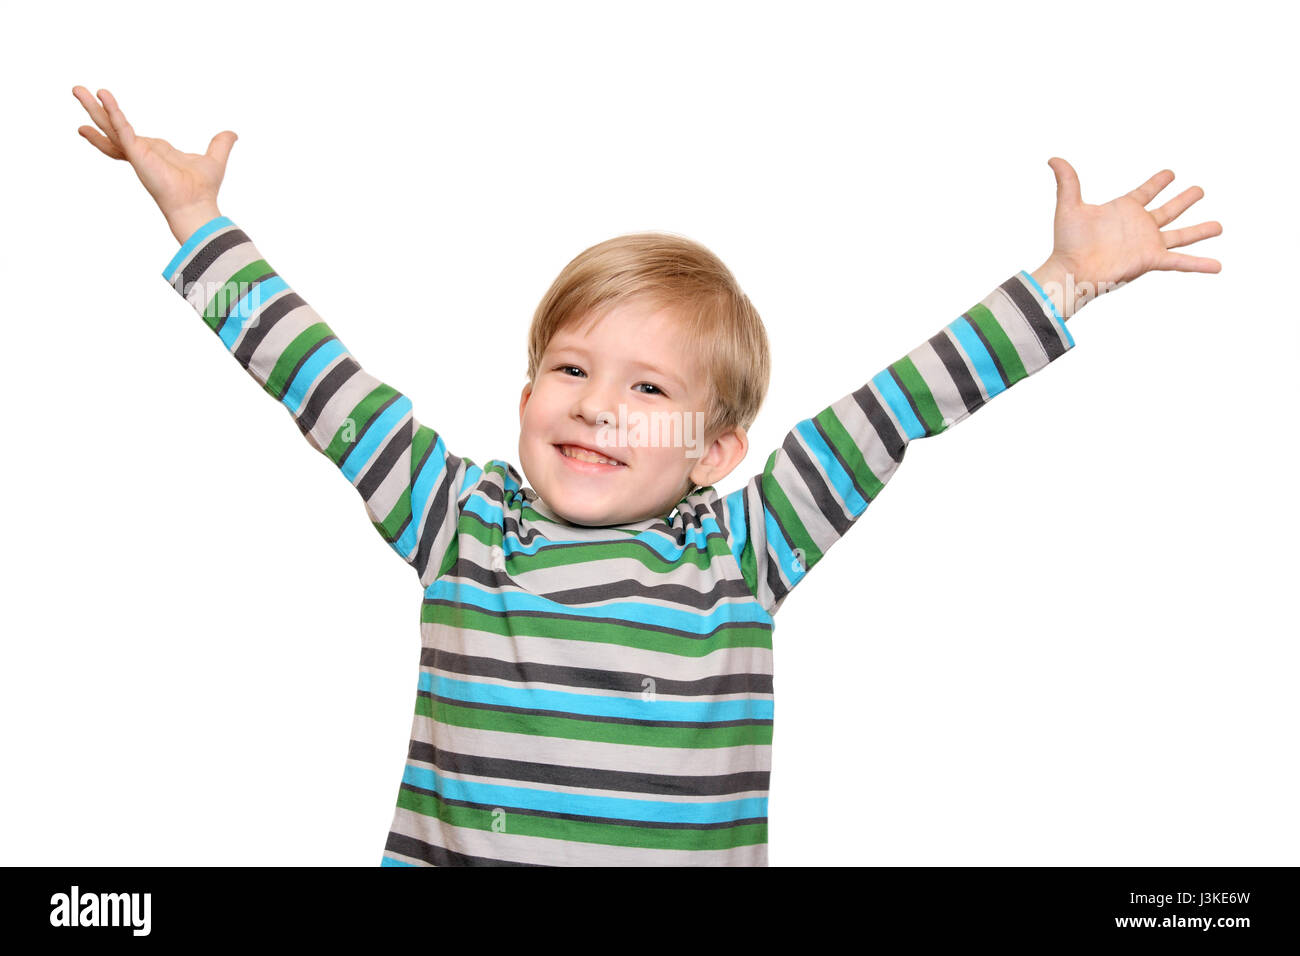 Joyful kid with arms outstretched welcomes, isolated on white background Stock Photo